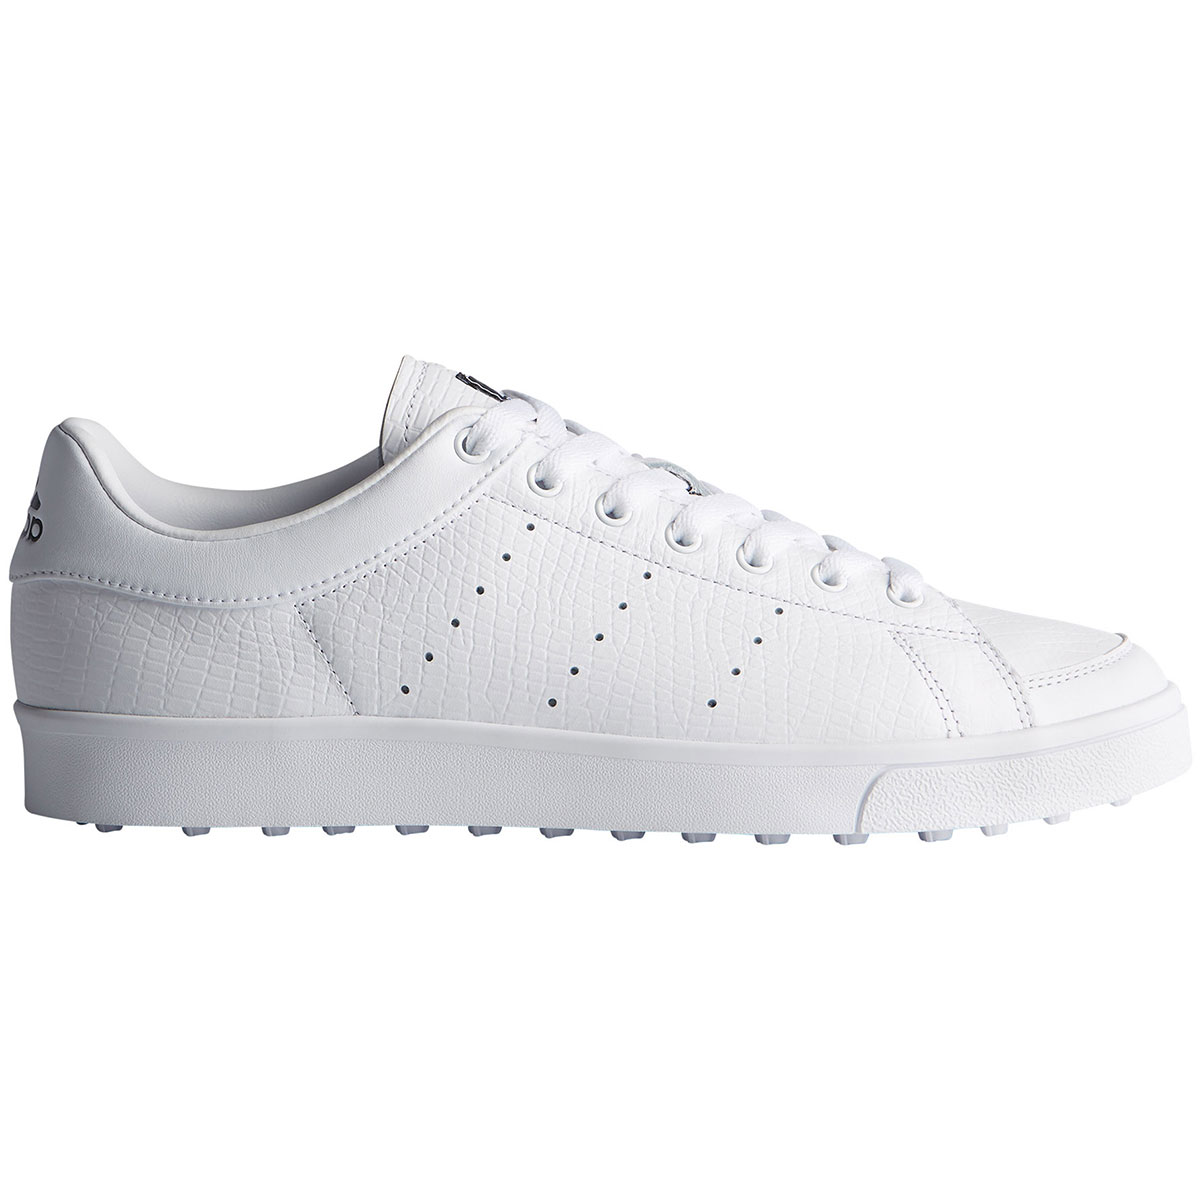 adidas Golf adicross Classic Leather Shoes from american golf